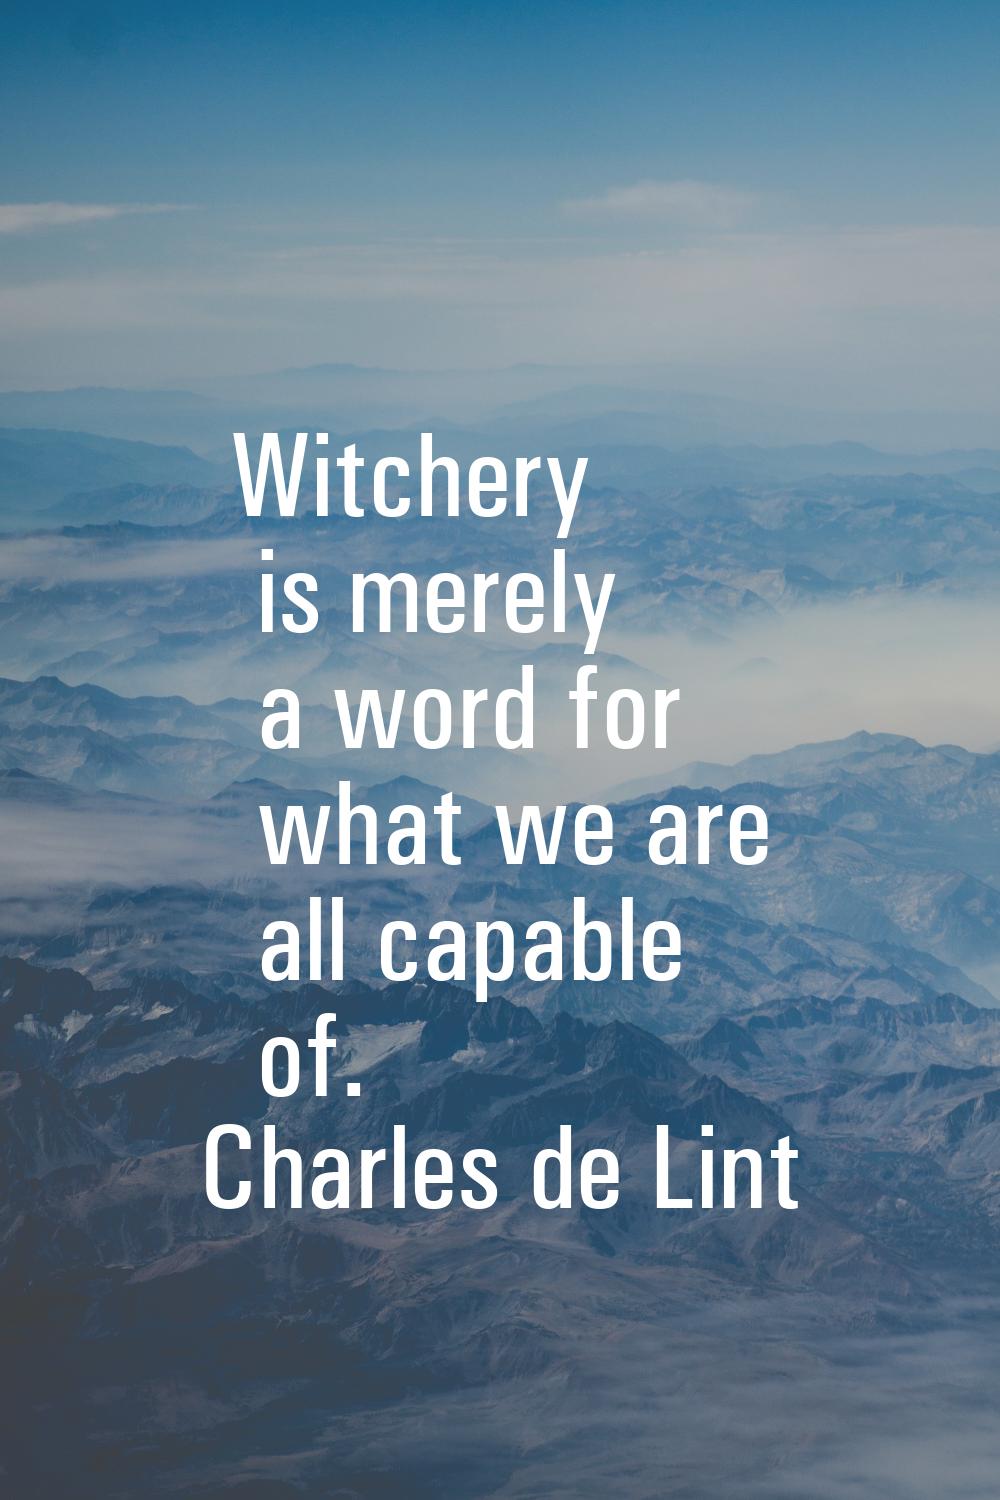 Witchery is merely a word for what we are all capable of.